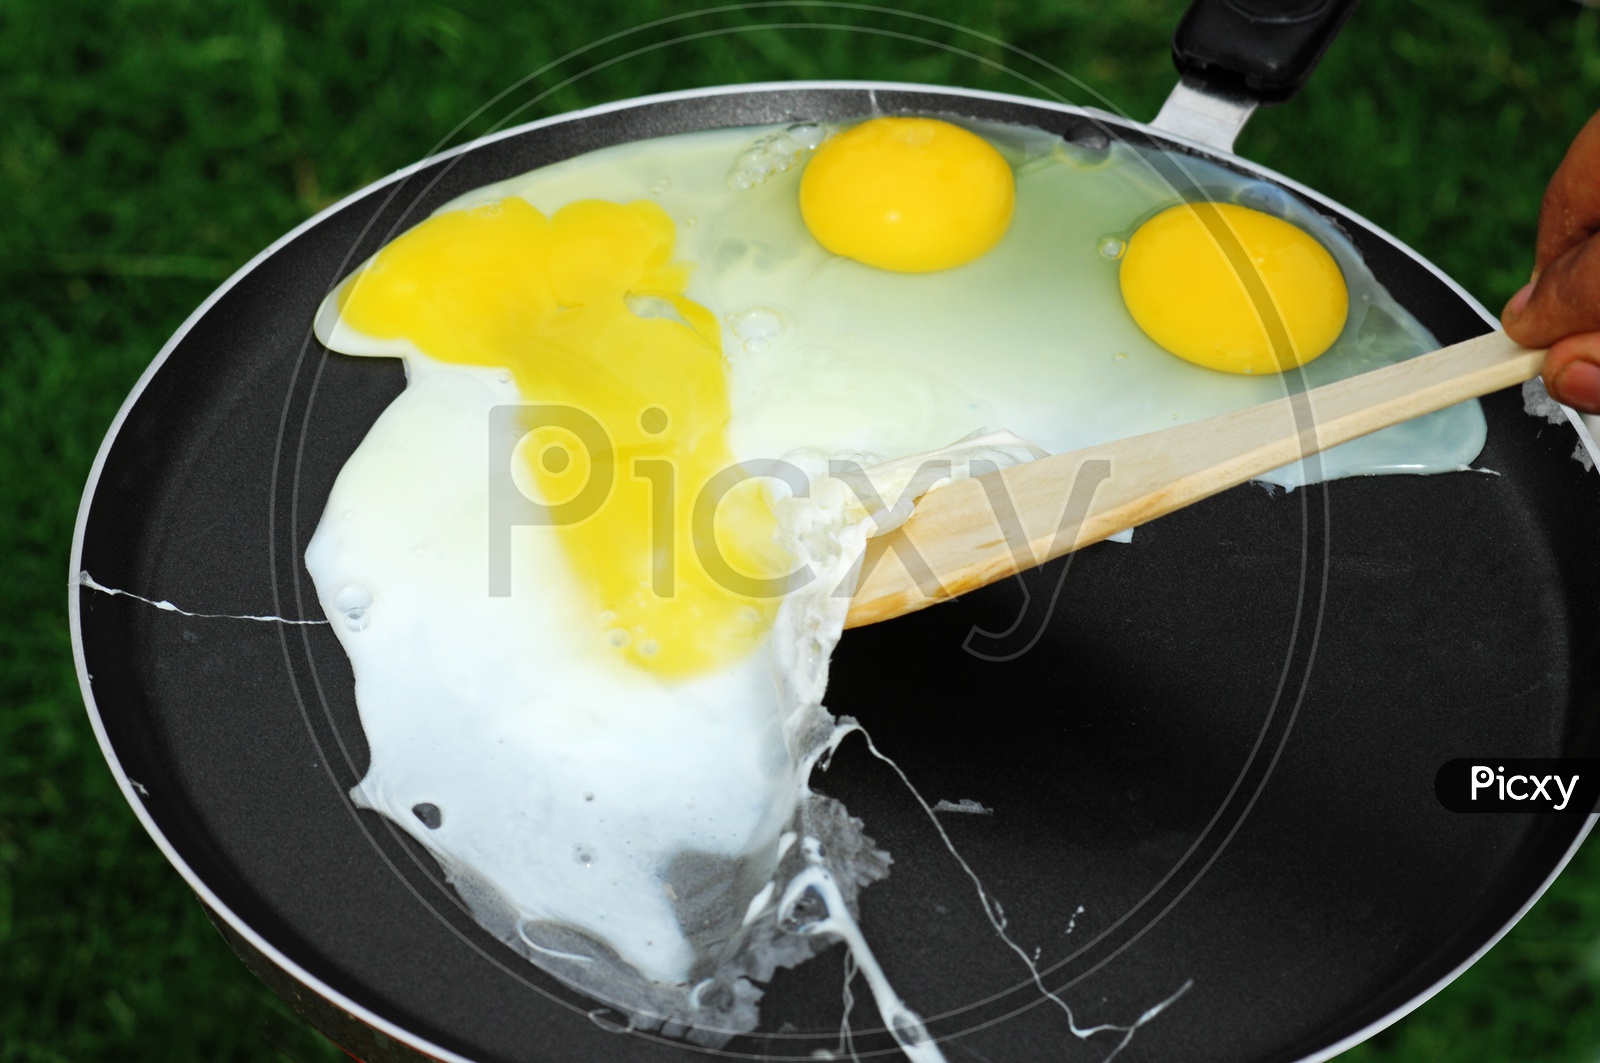 Omelette on a pan